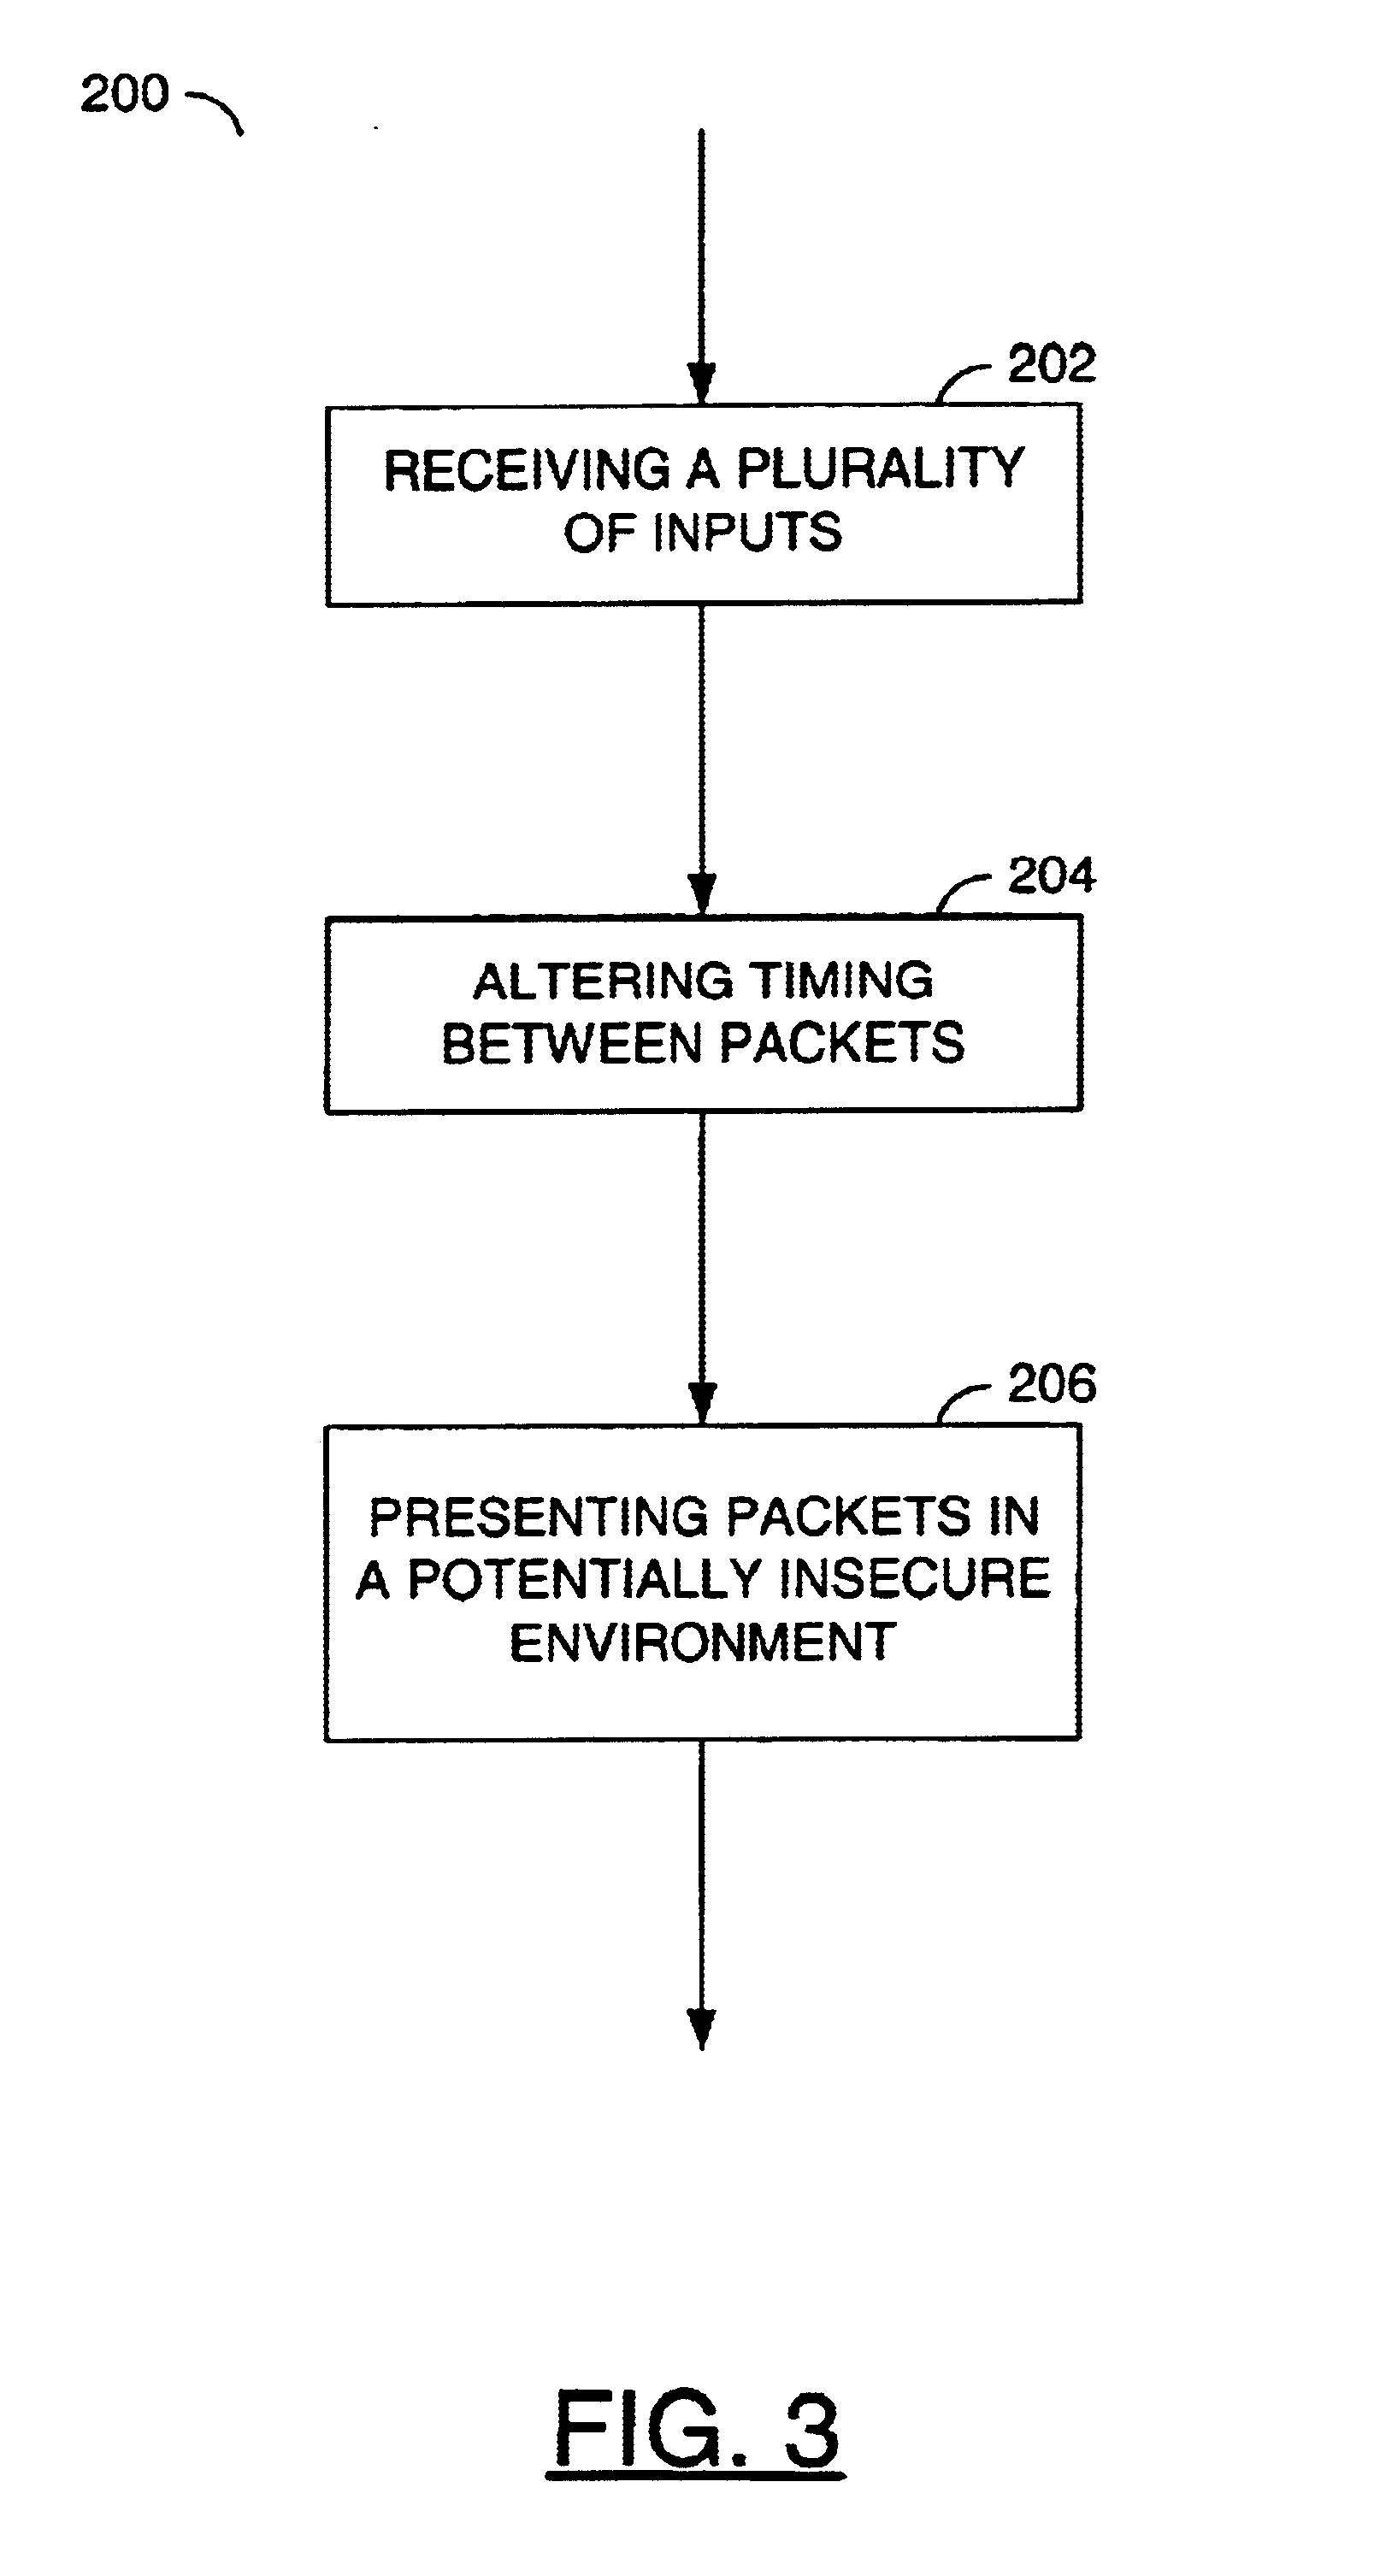 Method and/or apparatus for implementing security in keyboard-computer communication